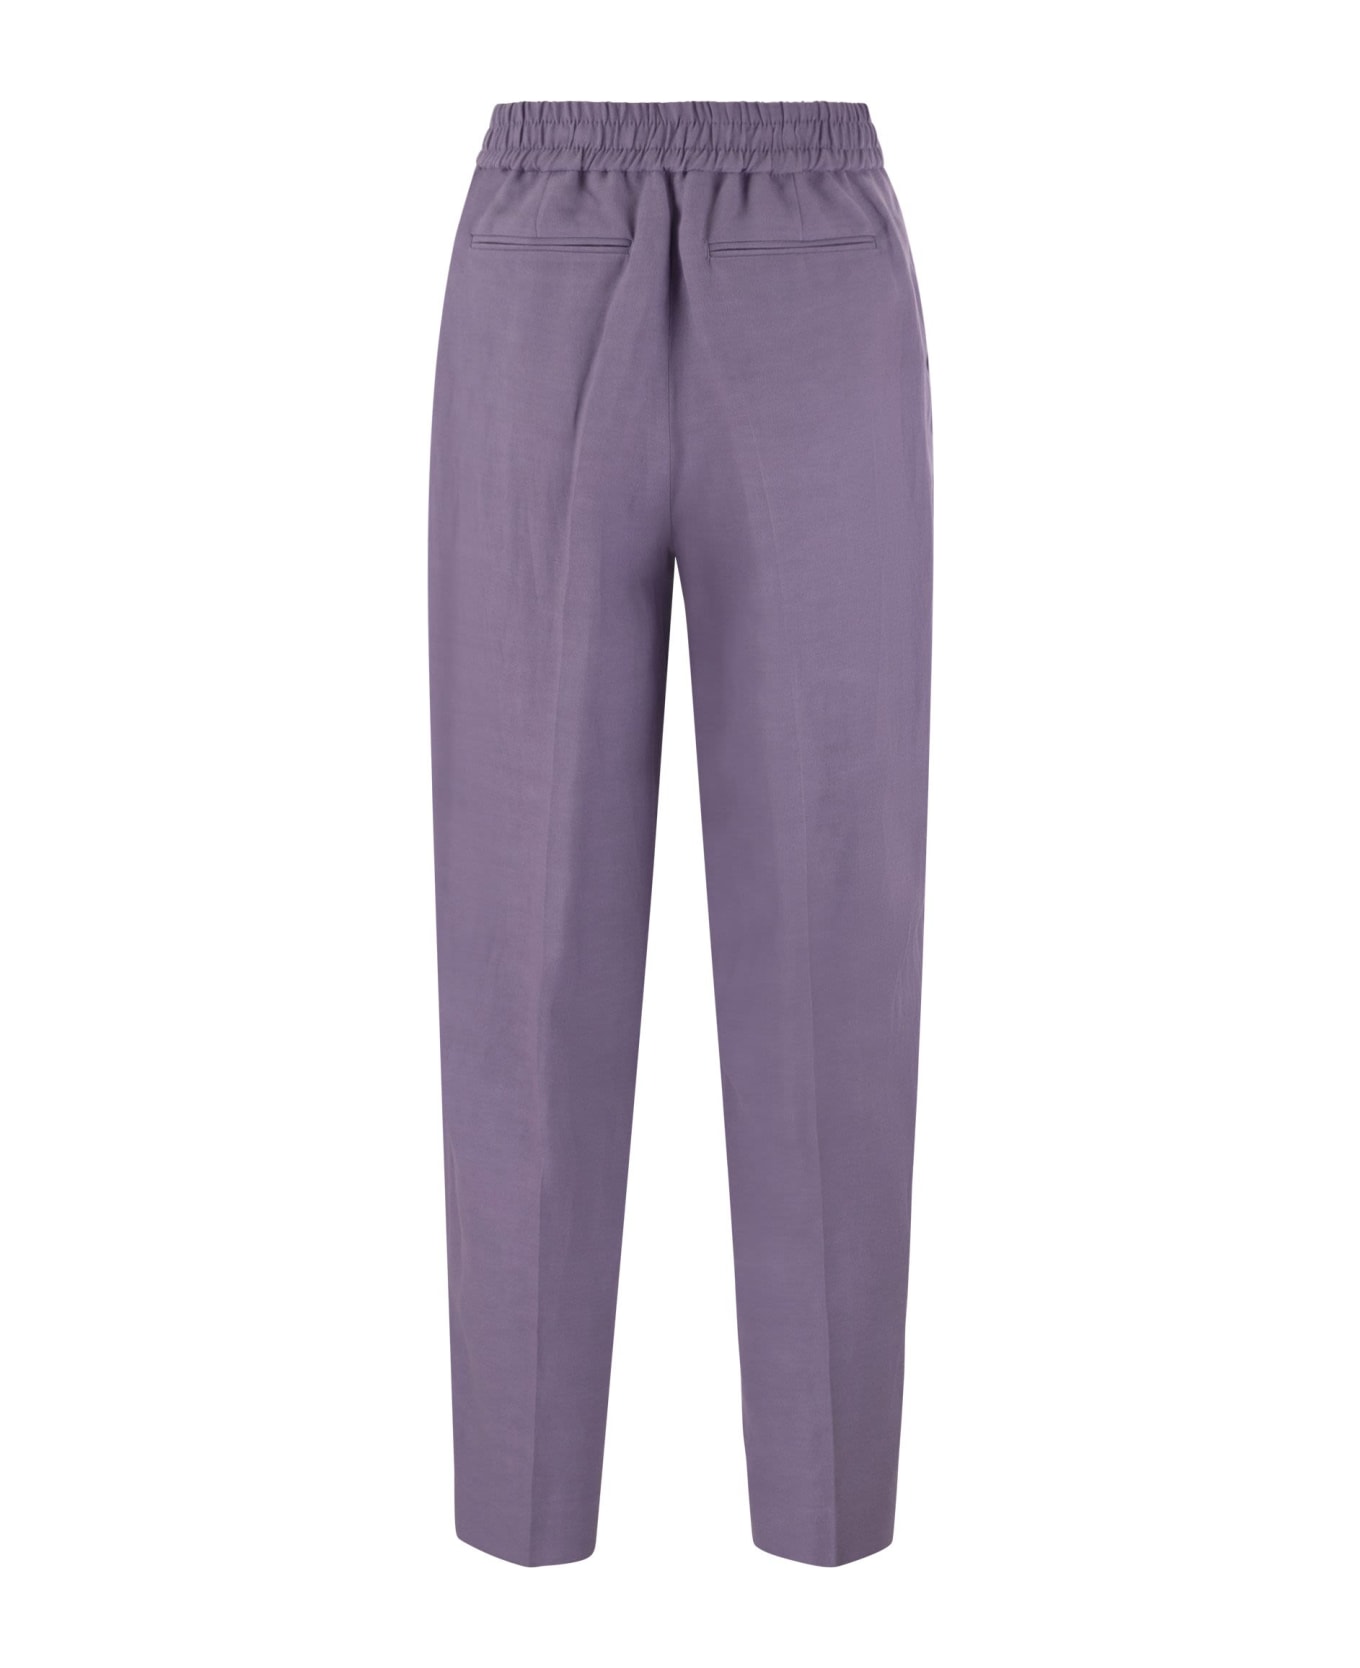 PT Torino Daisy - Viscose And Linen Trousers - Lilac ボトムス